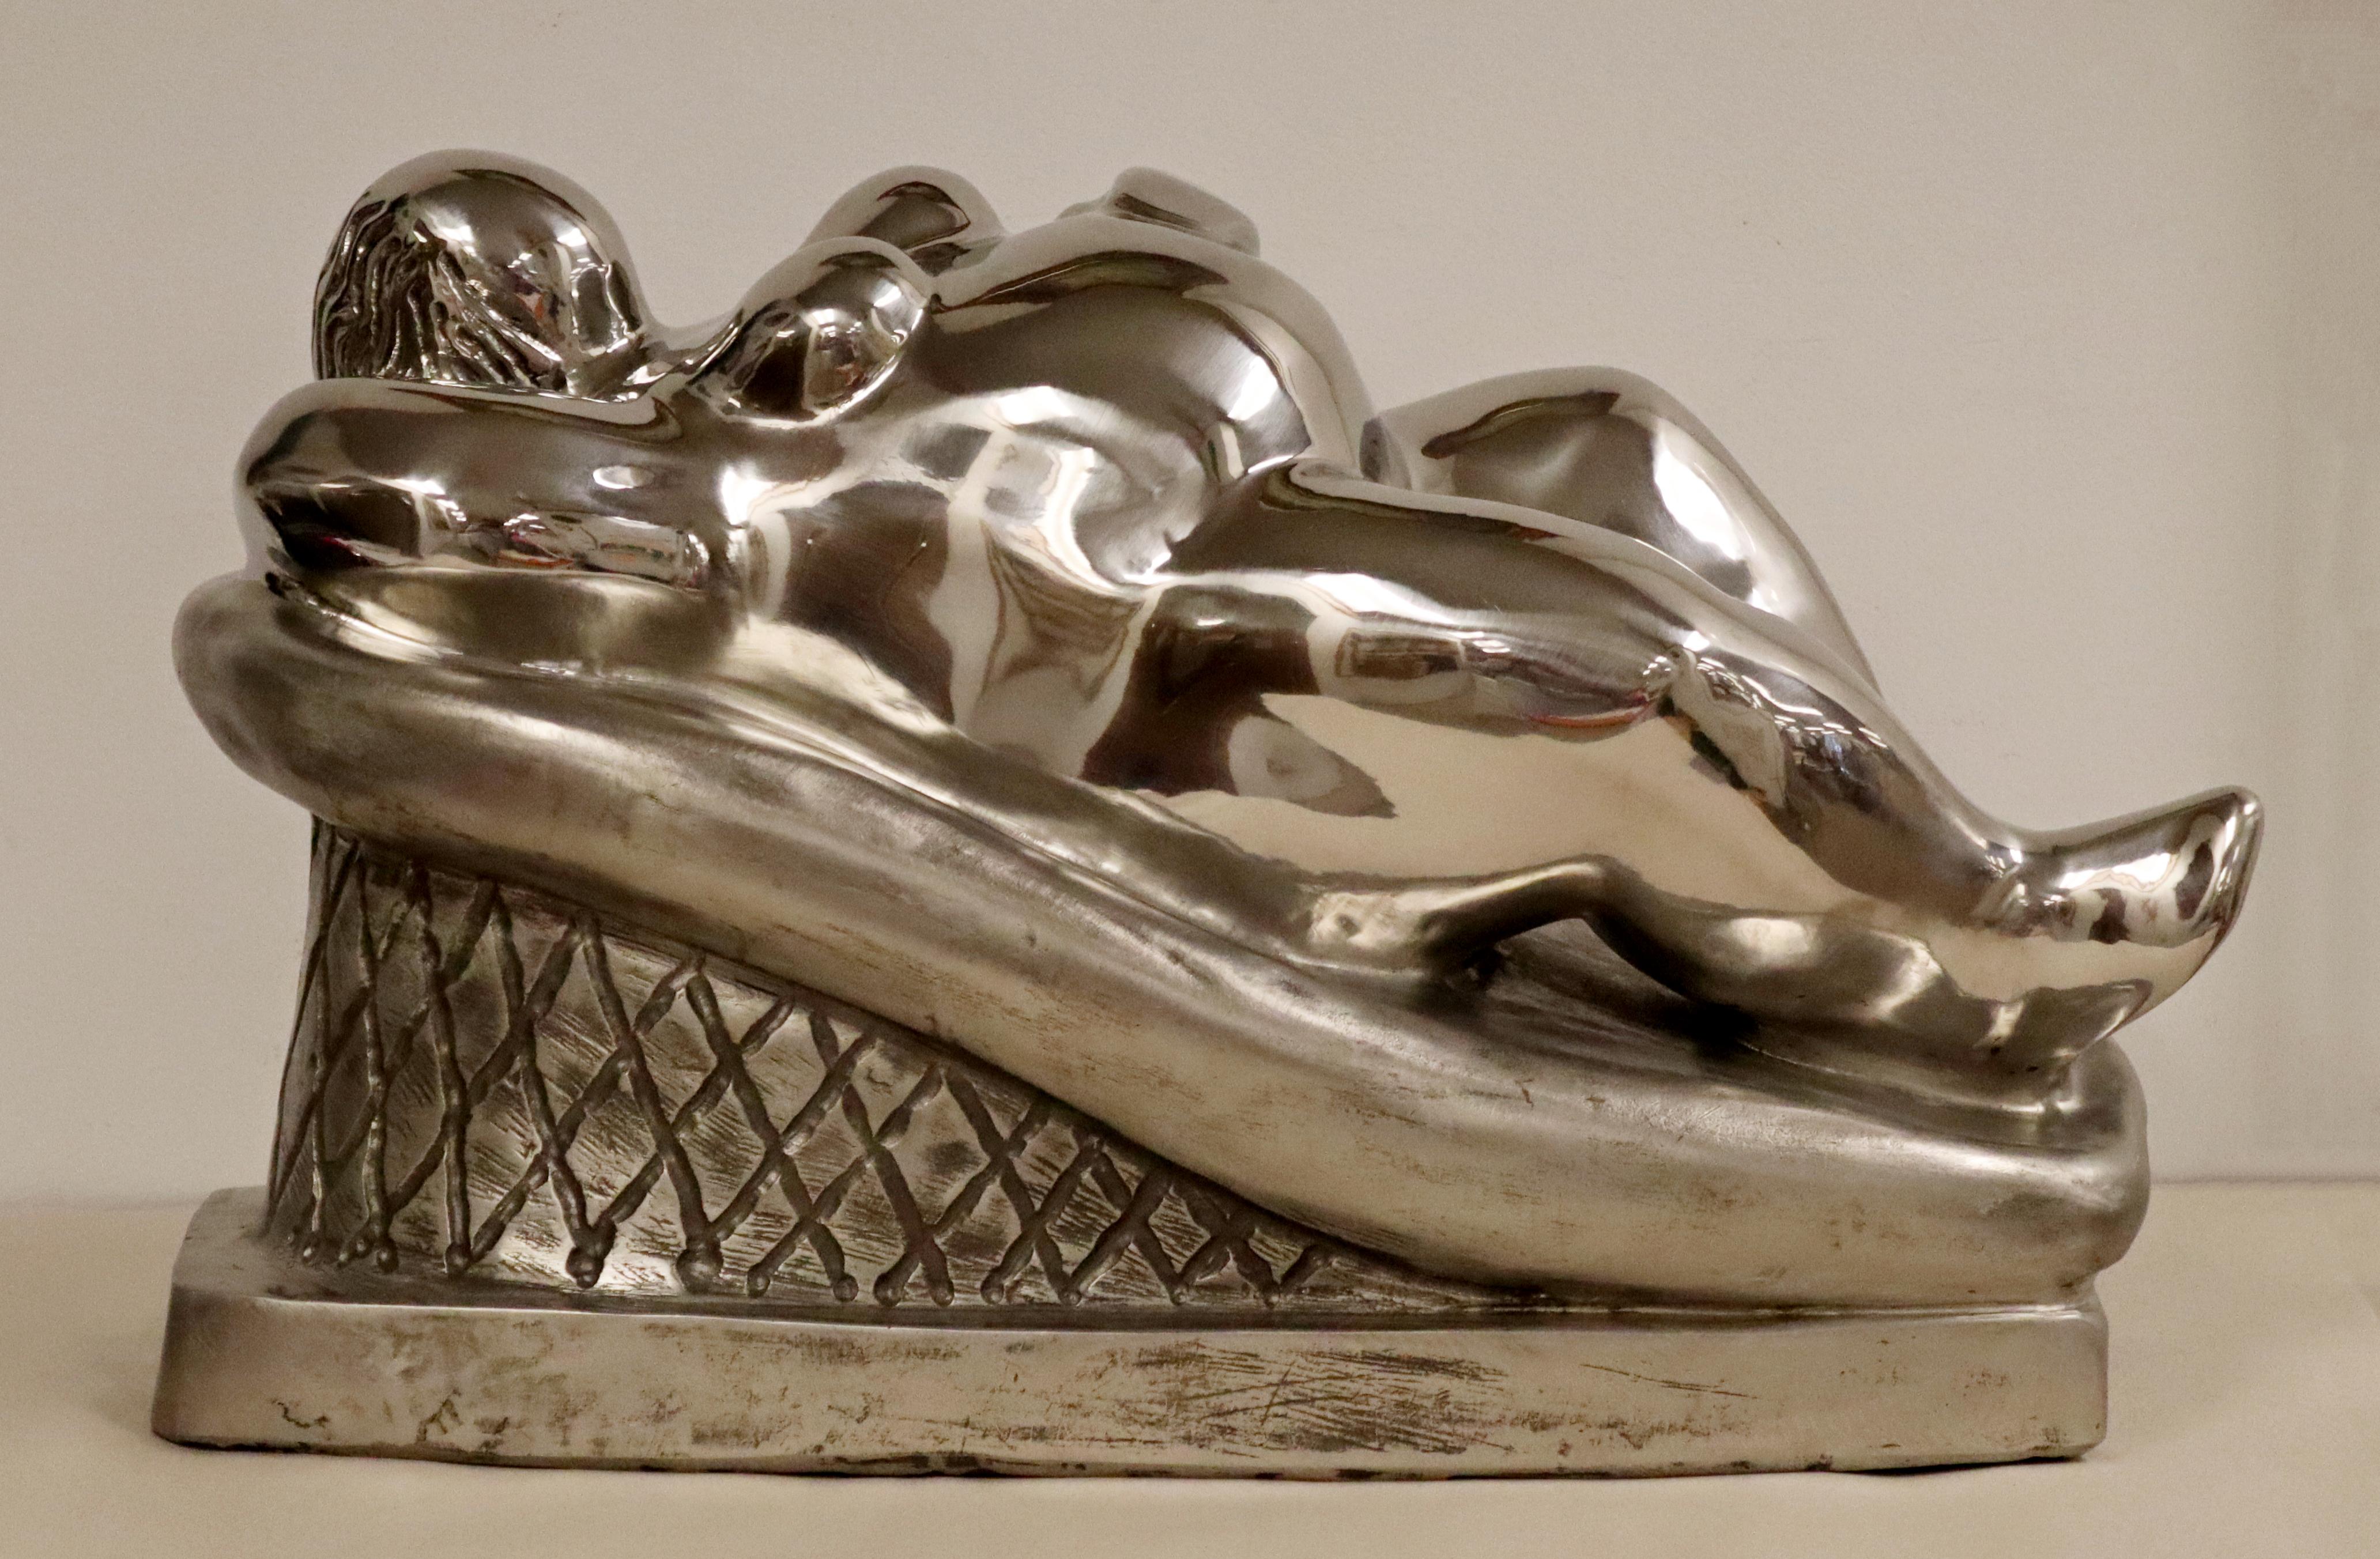 For your consideration is a magnificent, stainless steel table sculpture, of a reclining nude woman, 